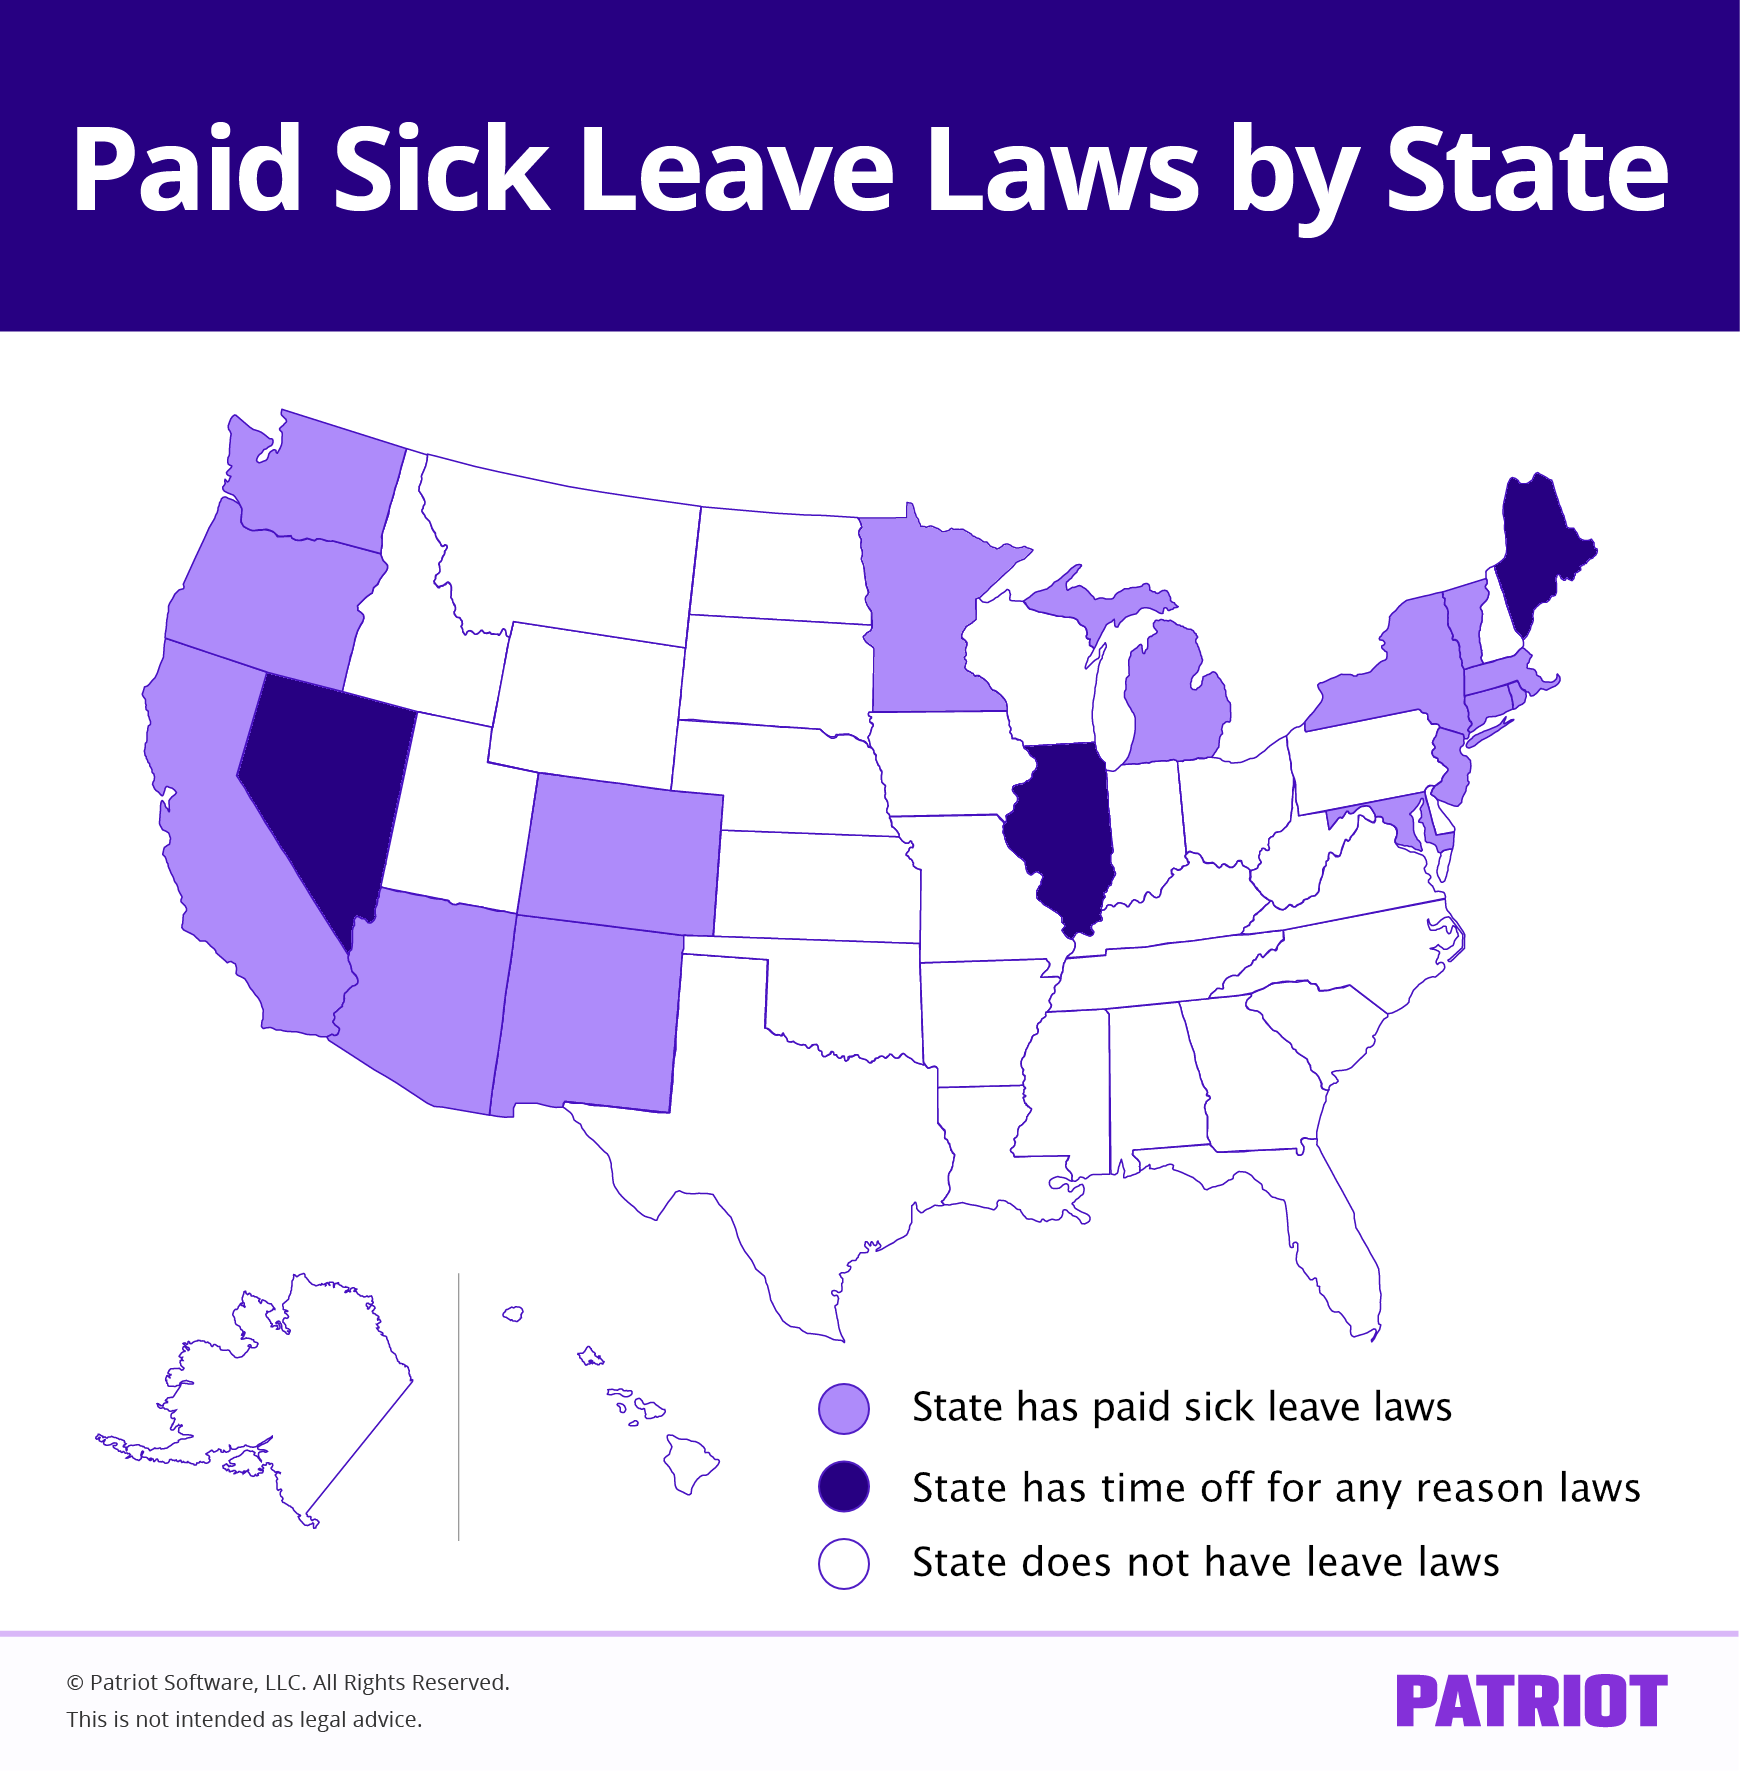 Paid sick leave laws by state: Map